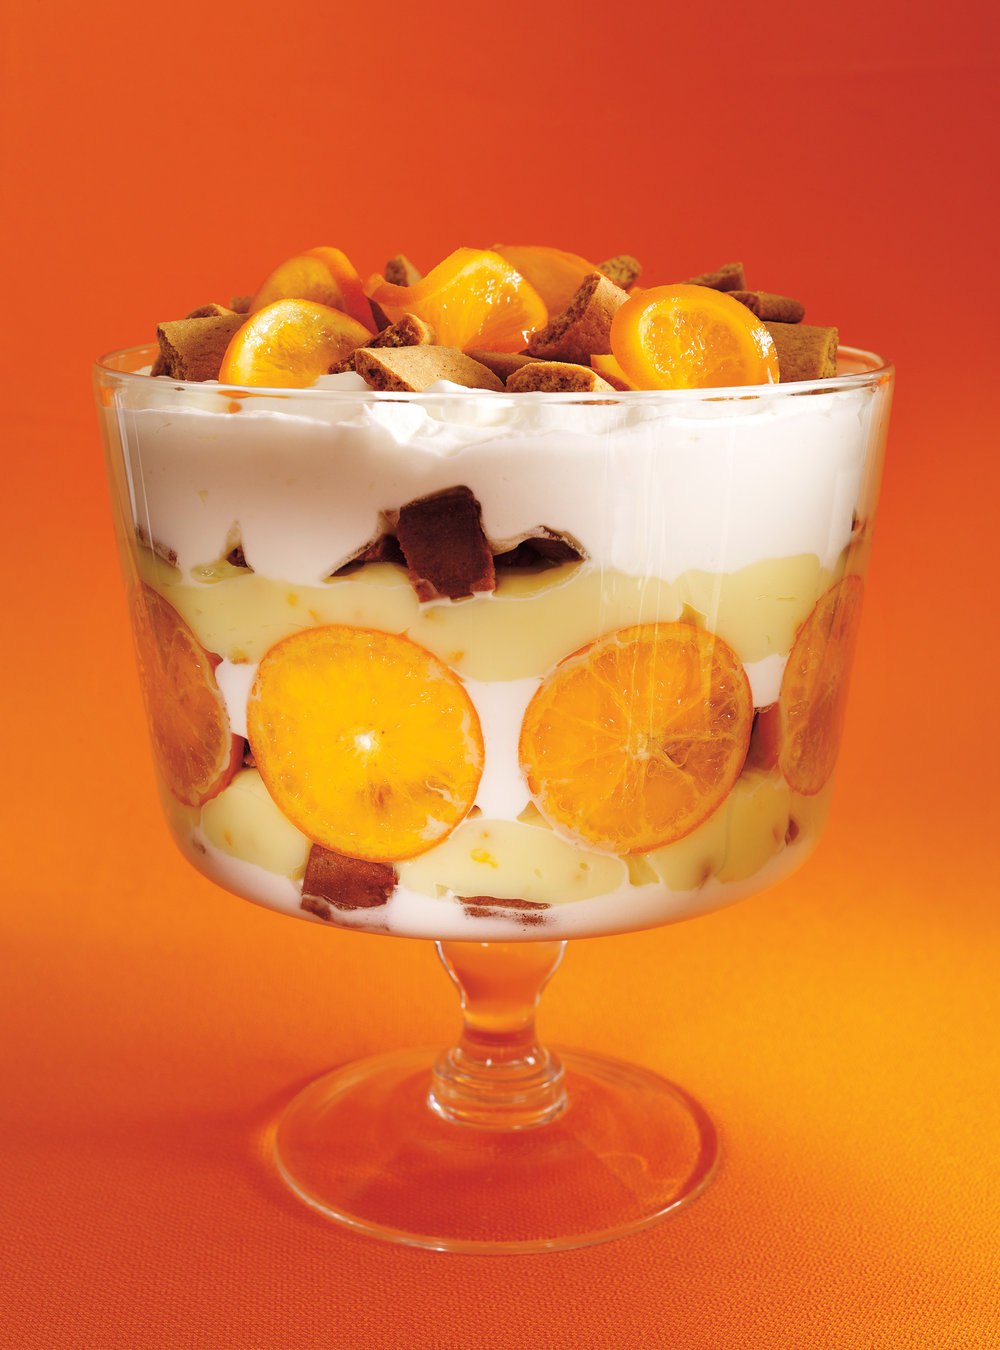 Clementine and Gingerbread Cookie Trifle